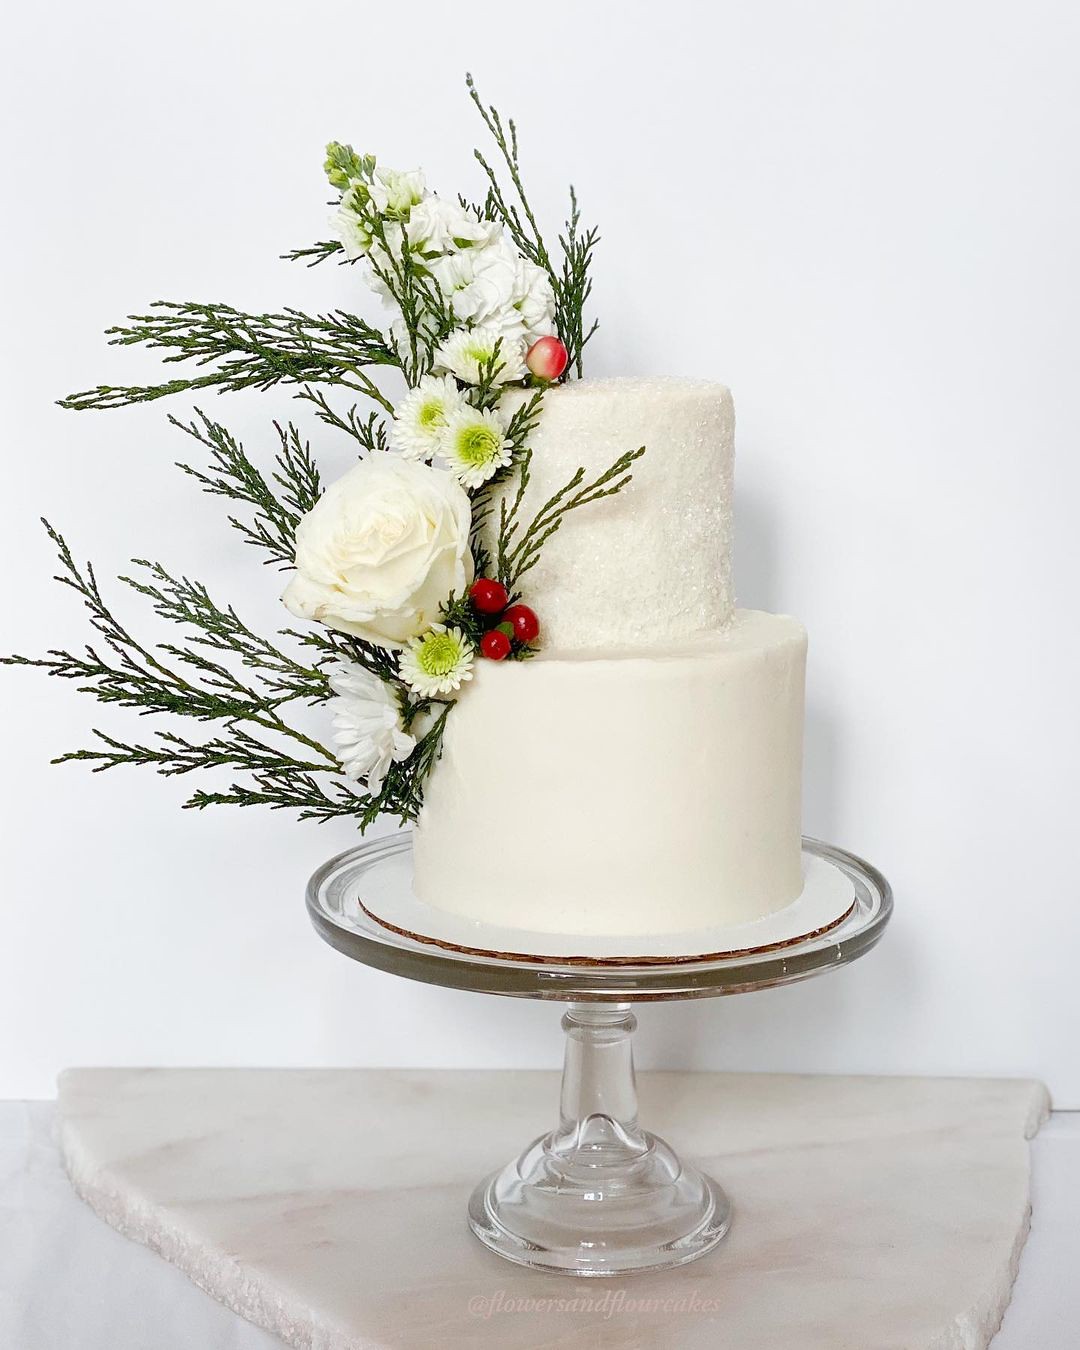 Cake by Flowers & Flour Cakes